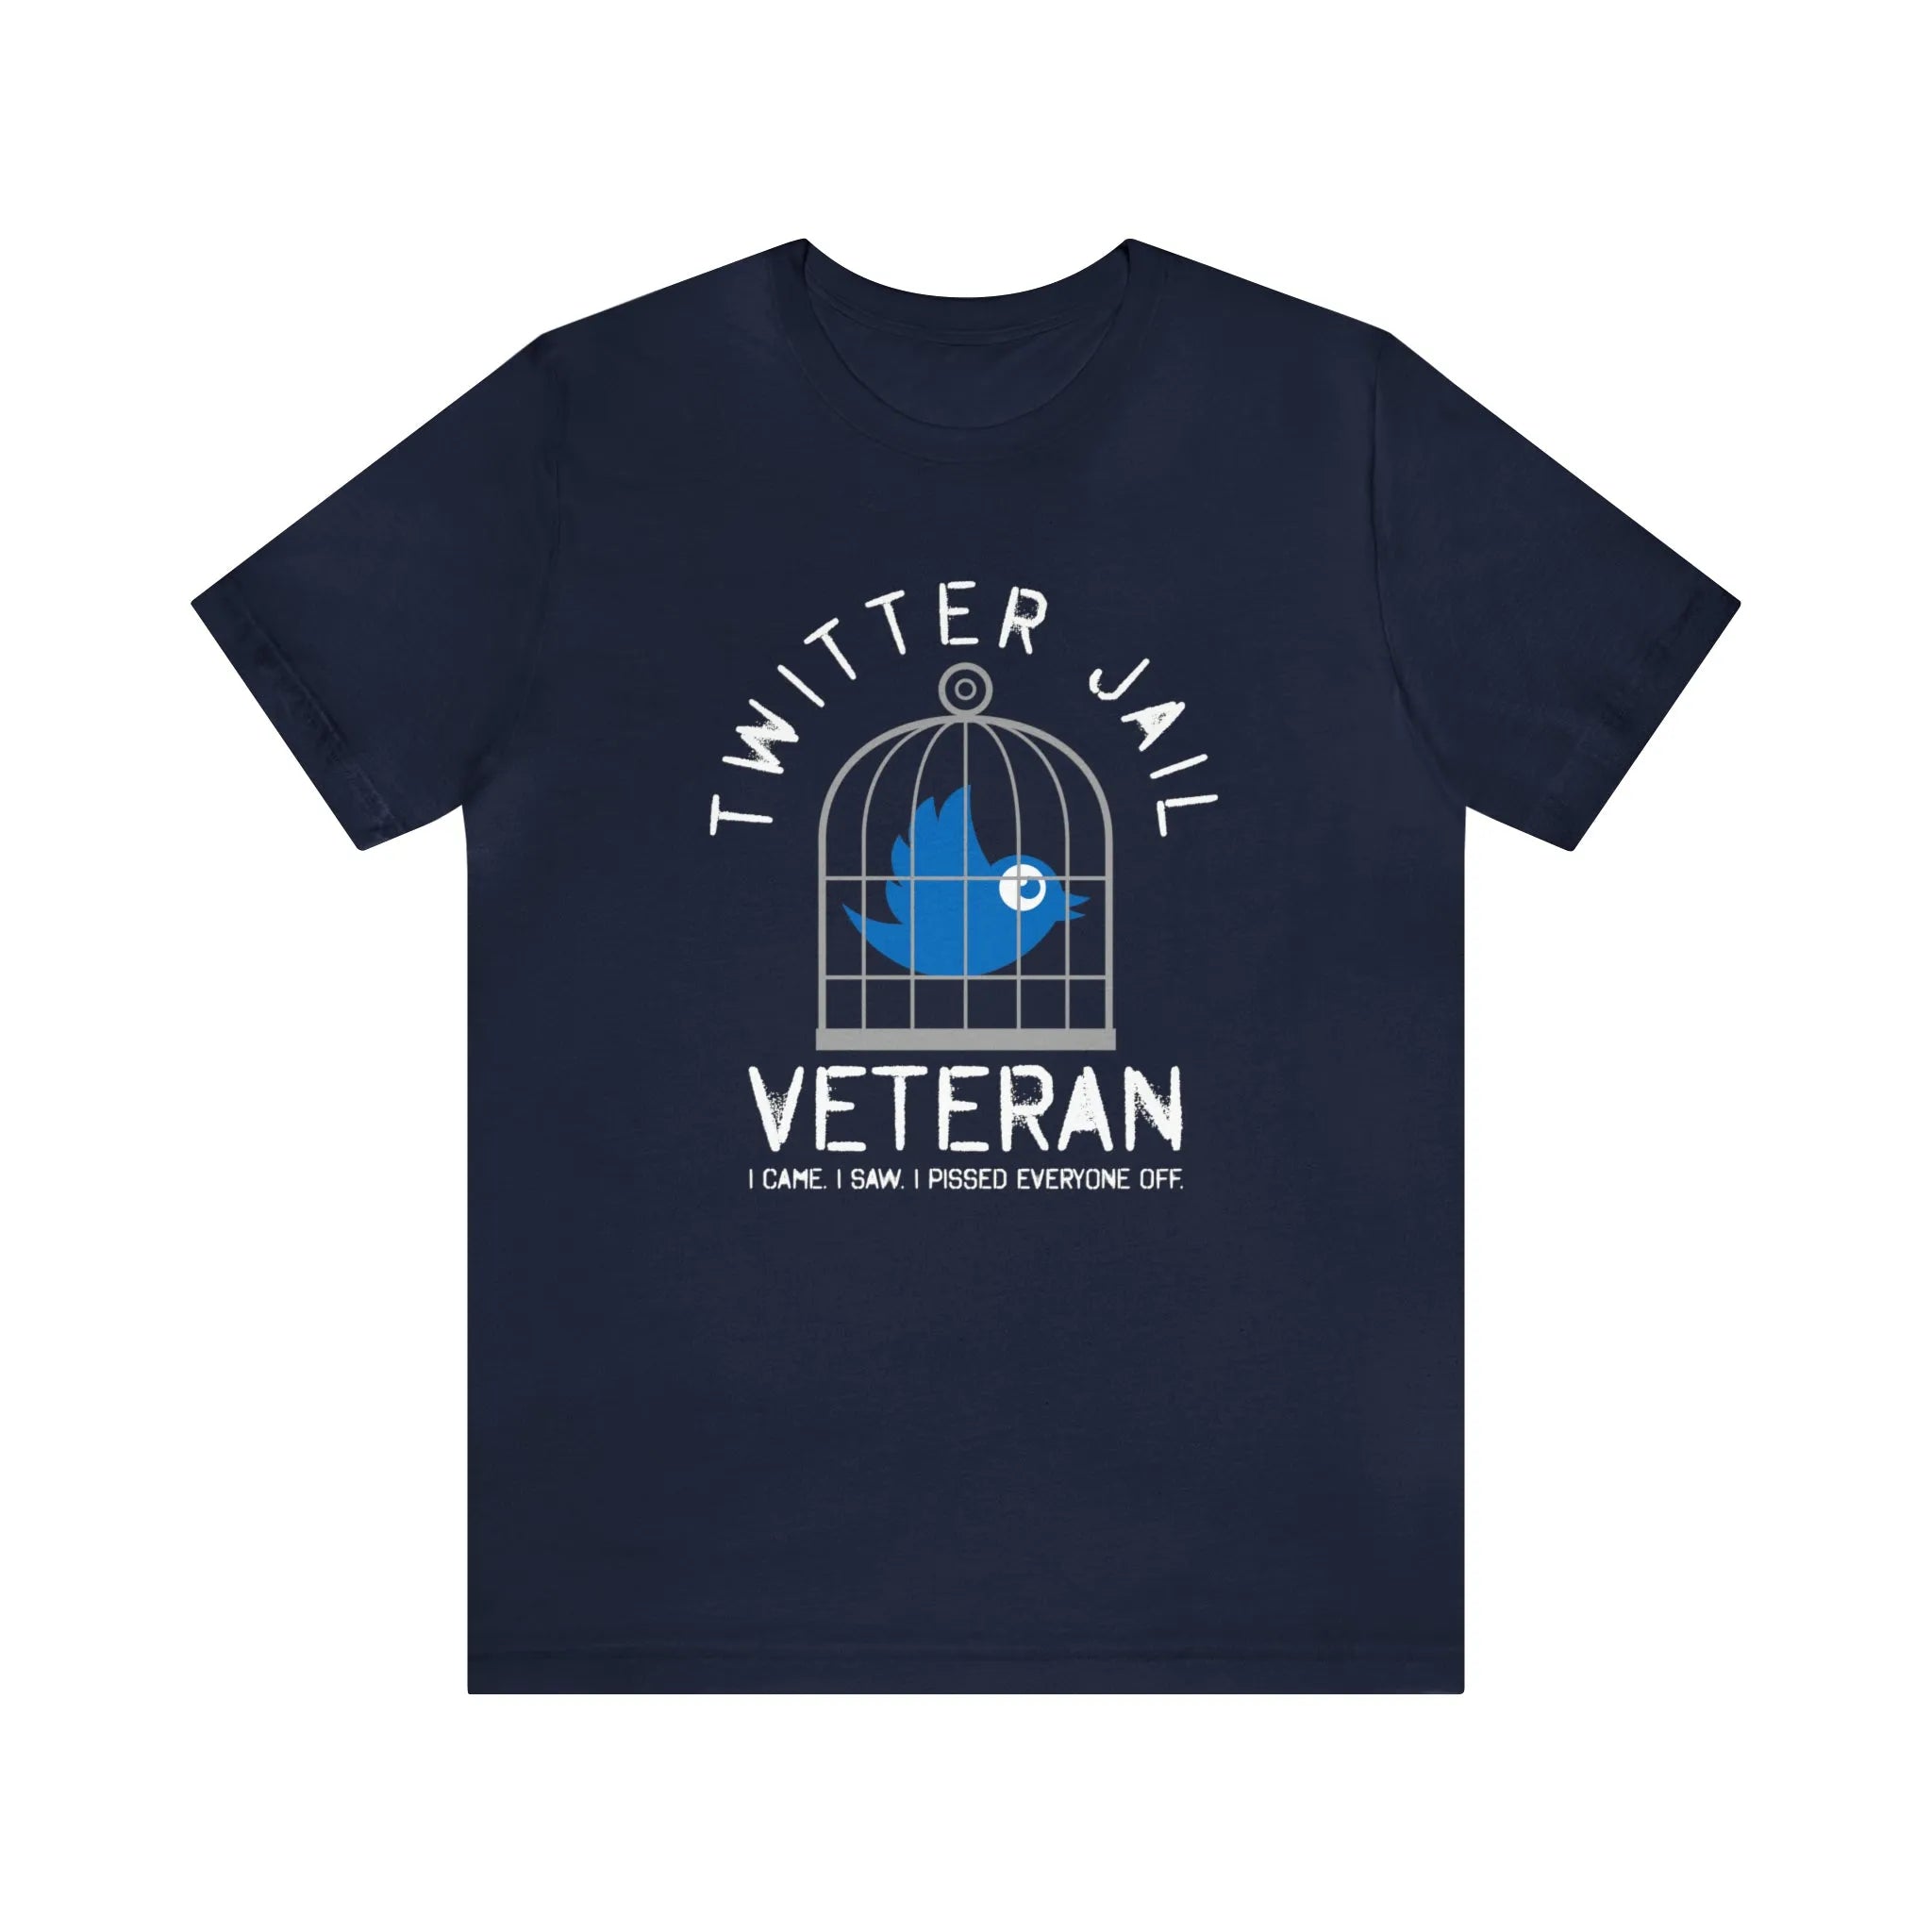 Escaped the Twitter Cage: Veteran Edition Shirt